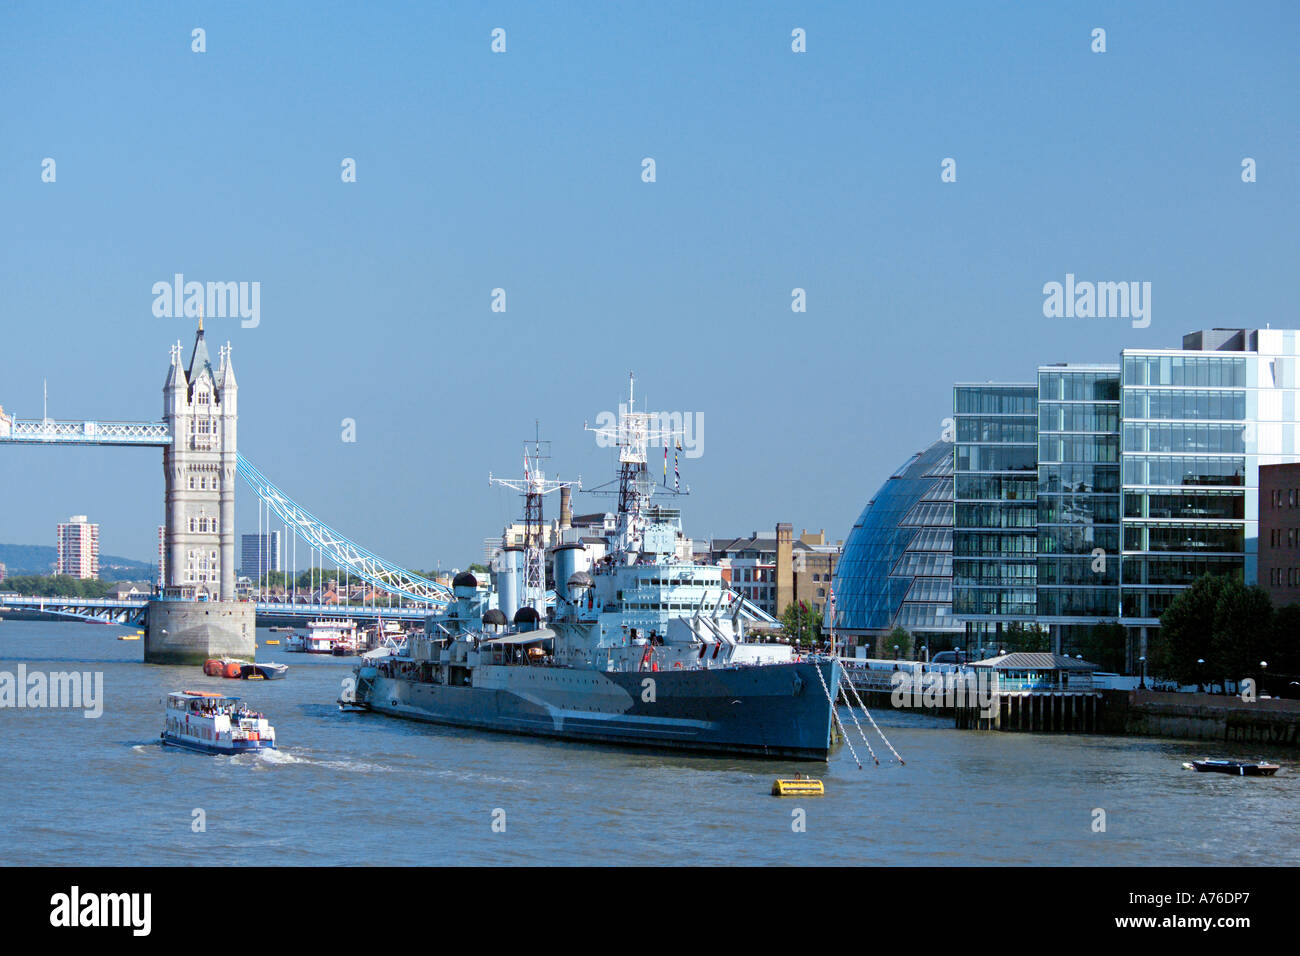 A view of the Thames with City Hall, Tower Bridge, HMS Belfast and a pleasure boat against a blue sky. Stock Photo